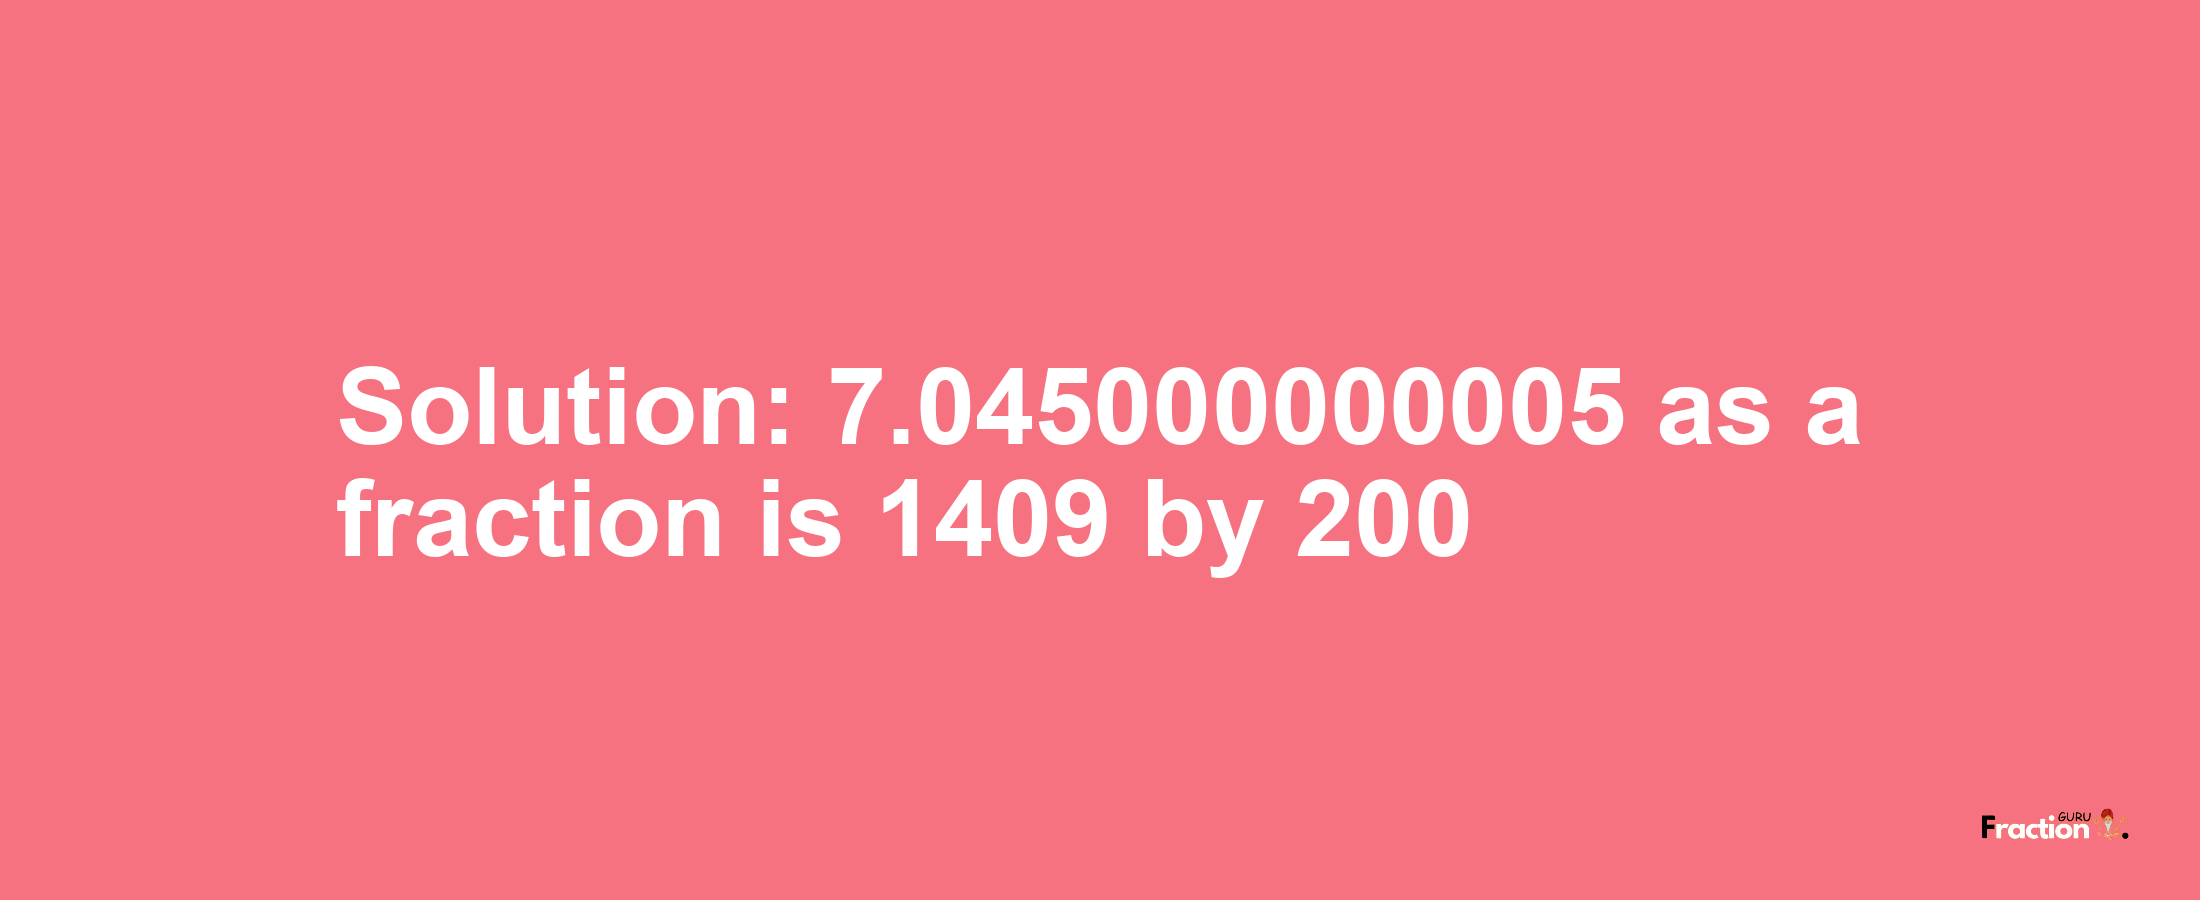 Solution:7.045000000005 as a fraction is 1409/200